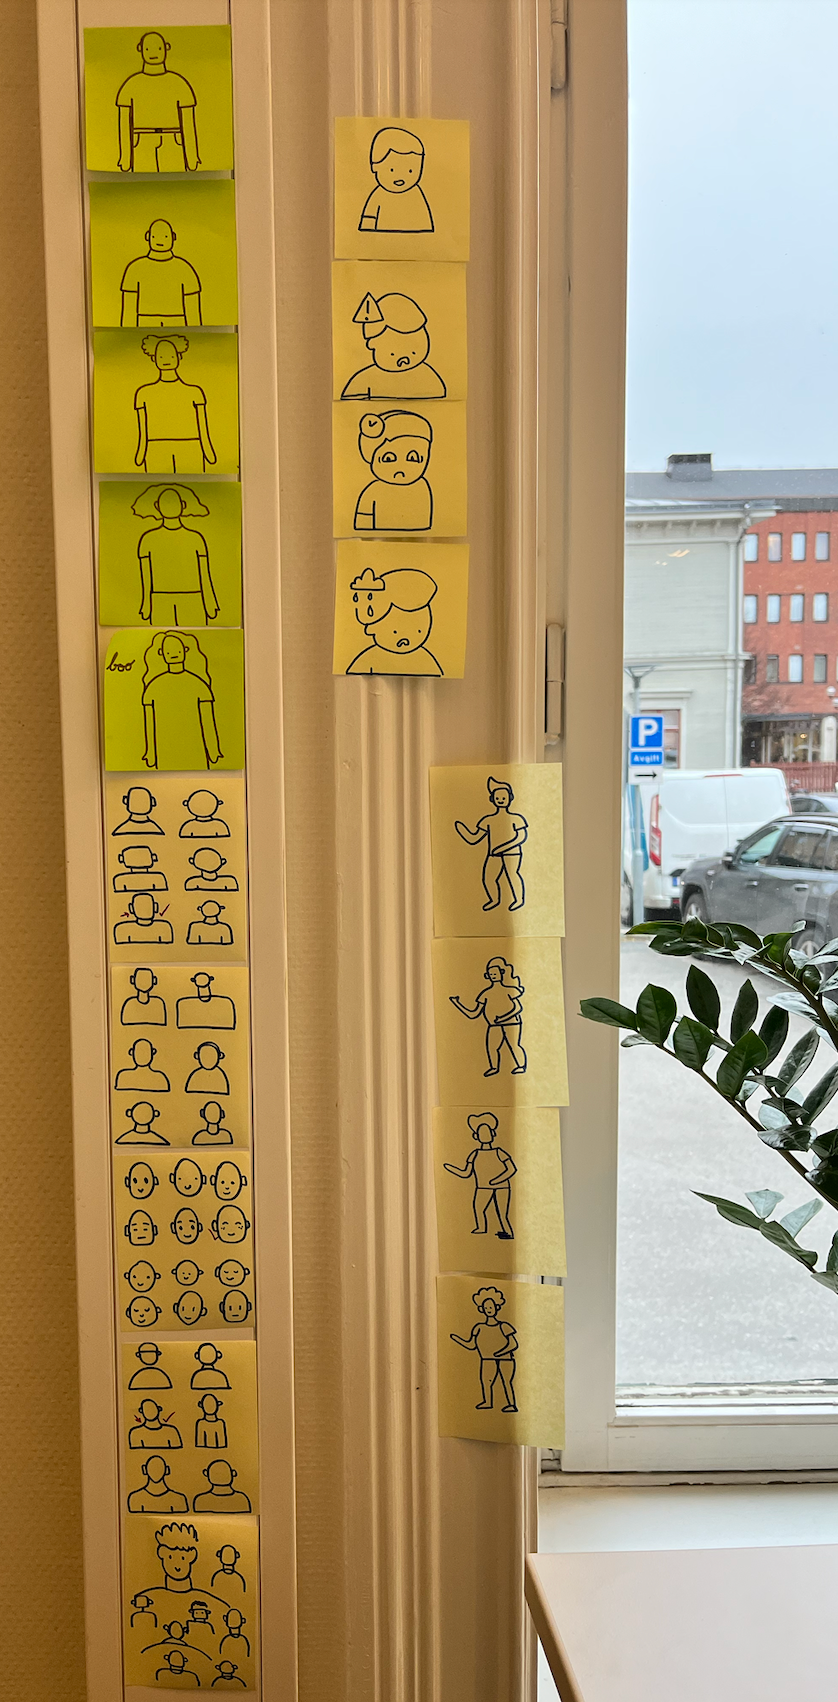 Post-it notes with hand drawn illustrations, sticked on a wall